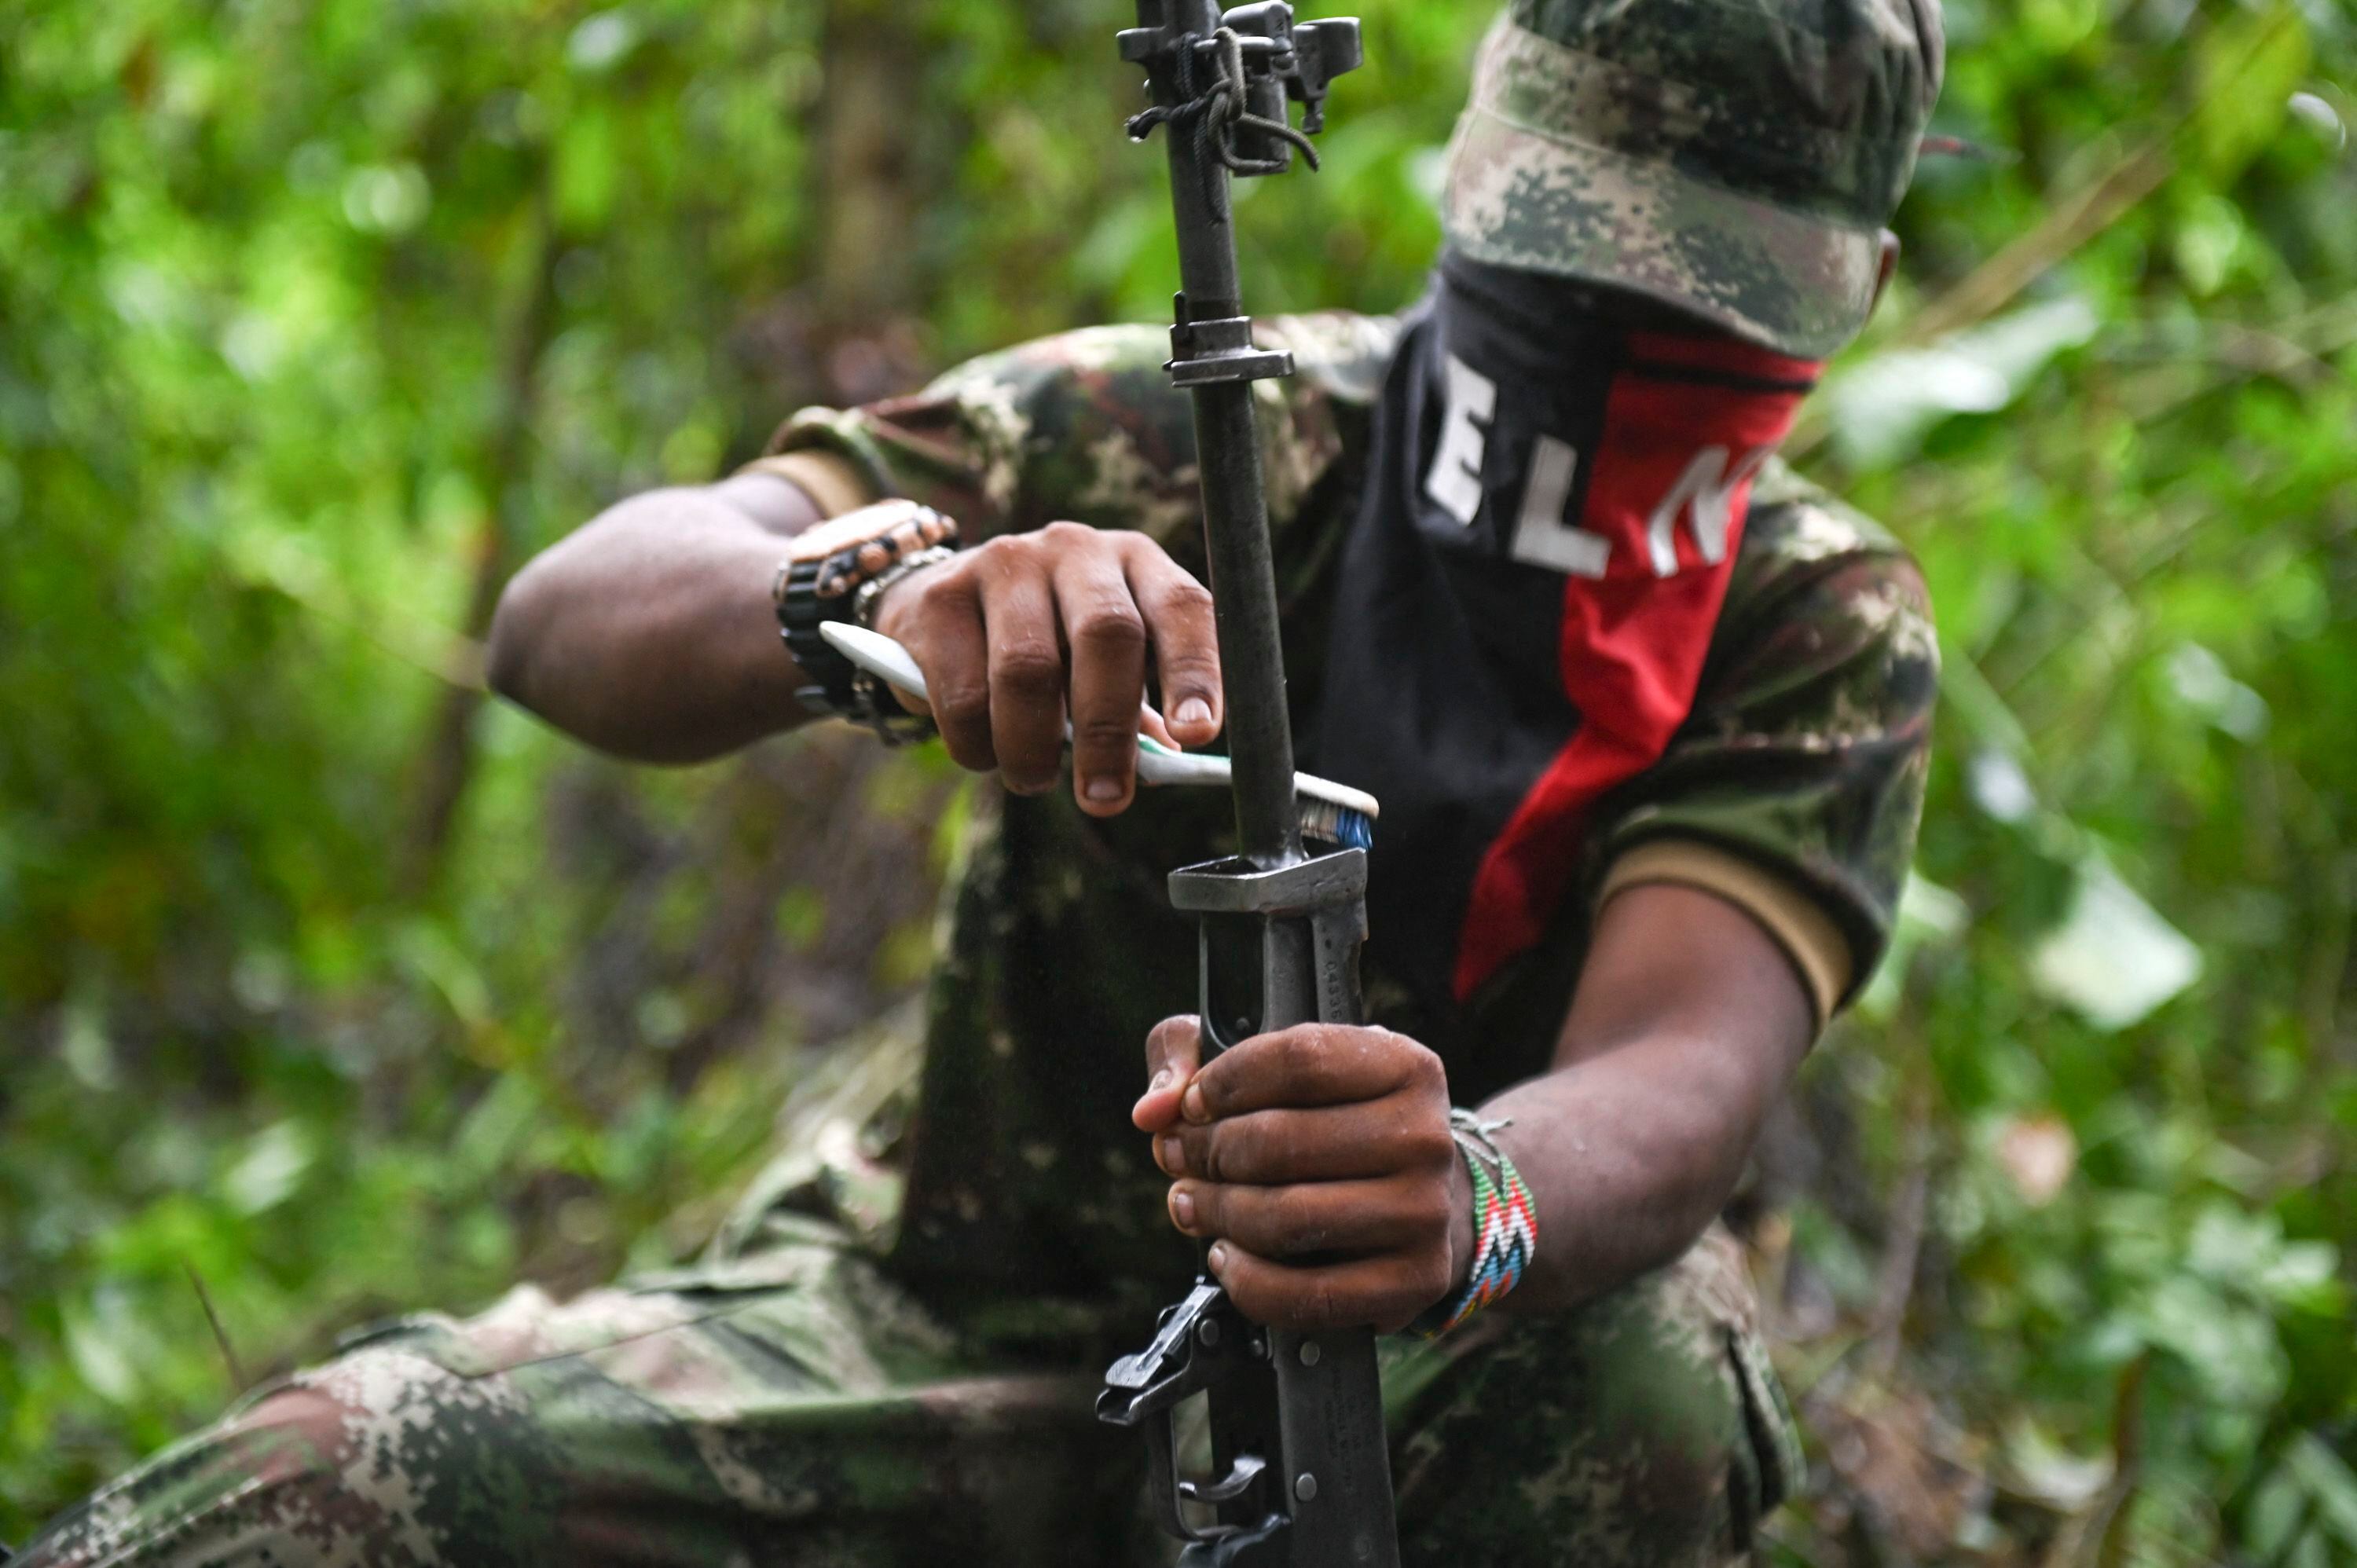 A member of the Ernesto Che Guevara front, belonging to the National Liberation Army (ELN) guerrilla, cleans his weapon in the jungle of Chocó, Colombia, on May 25, 2019. (Photo by Raúl ARBOLEDA / AFP)